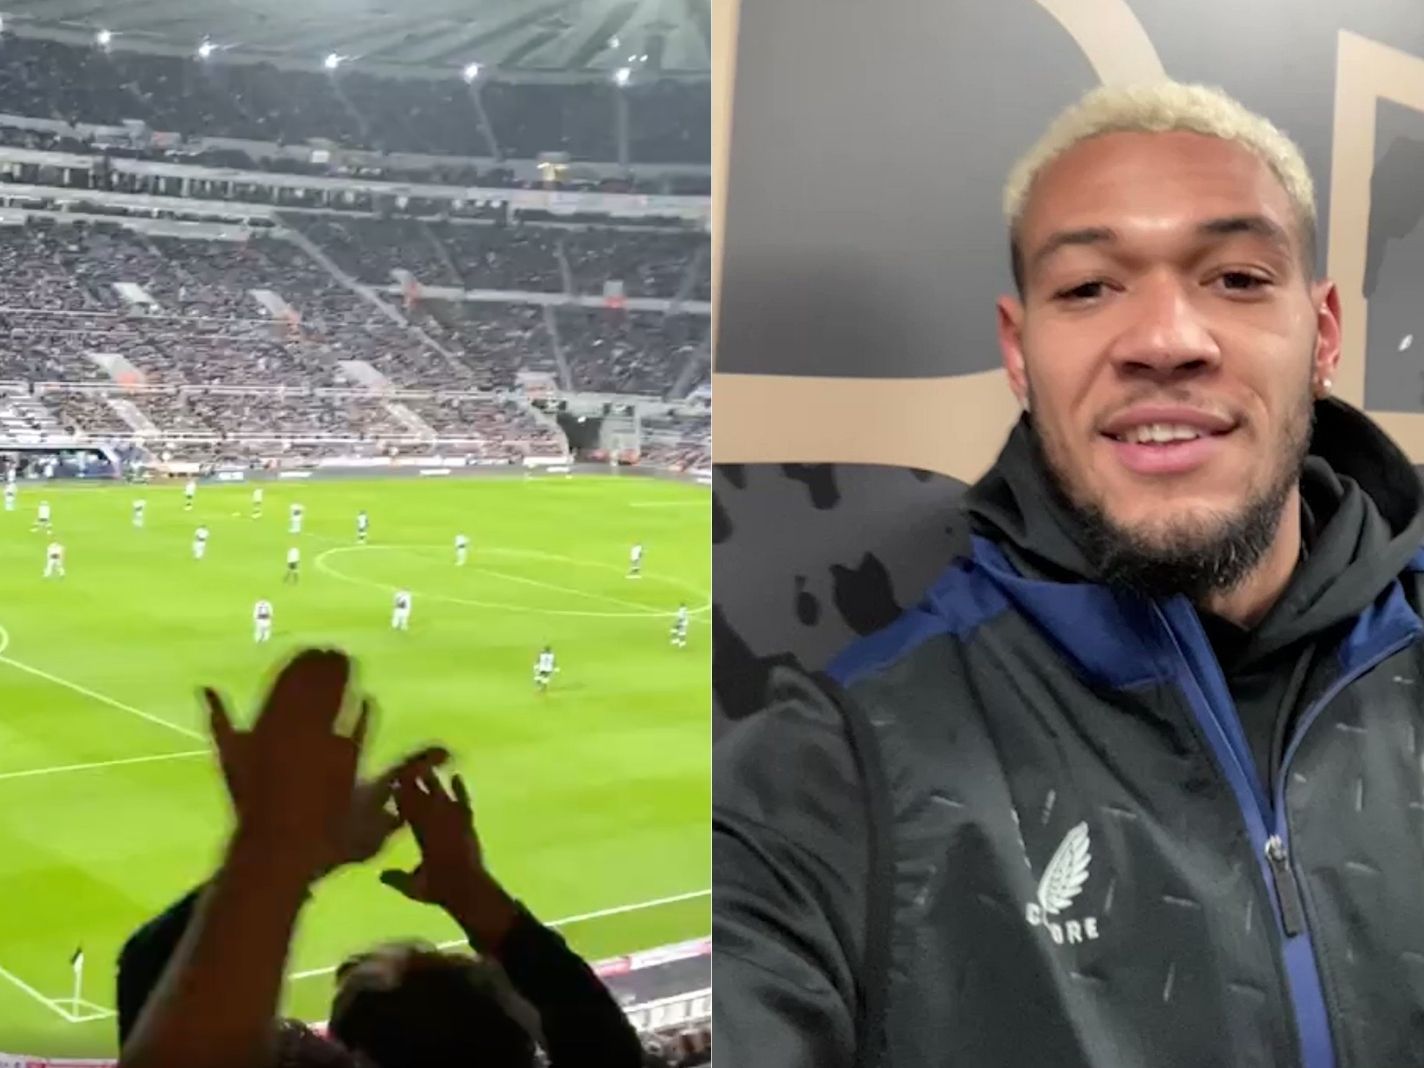 Newcastle fans reveal new chant for Joelinton sung to the tune of She’s Electric by Oasis